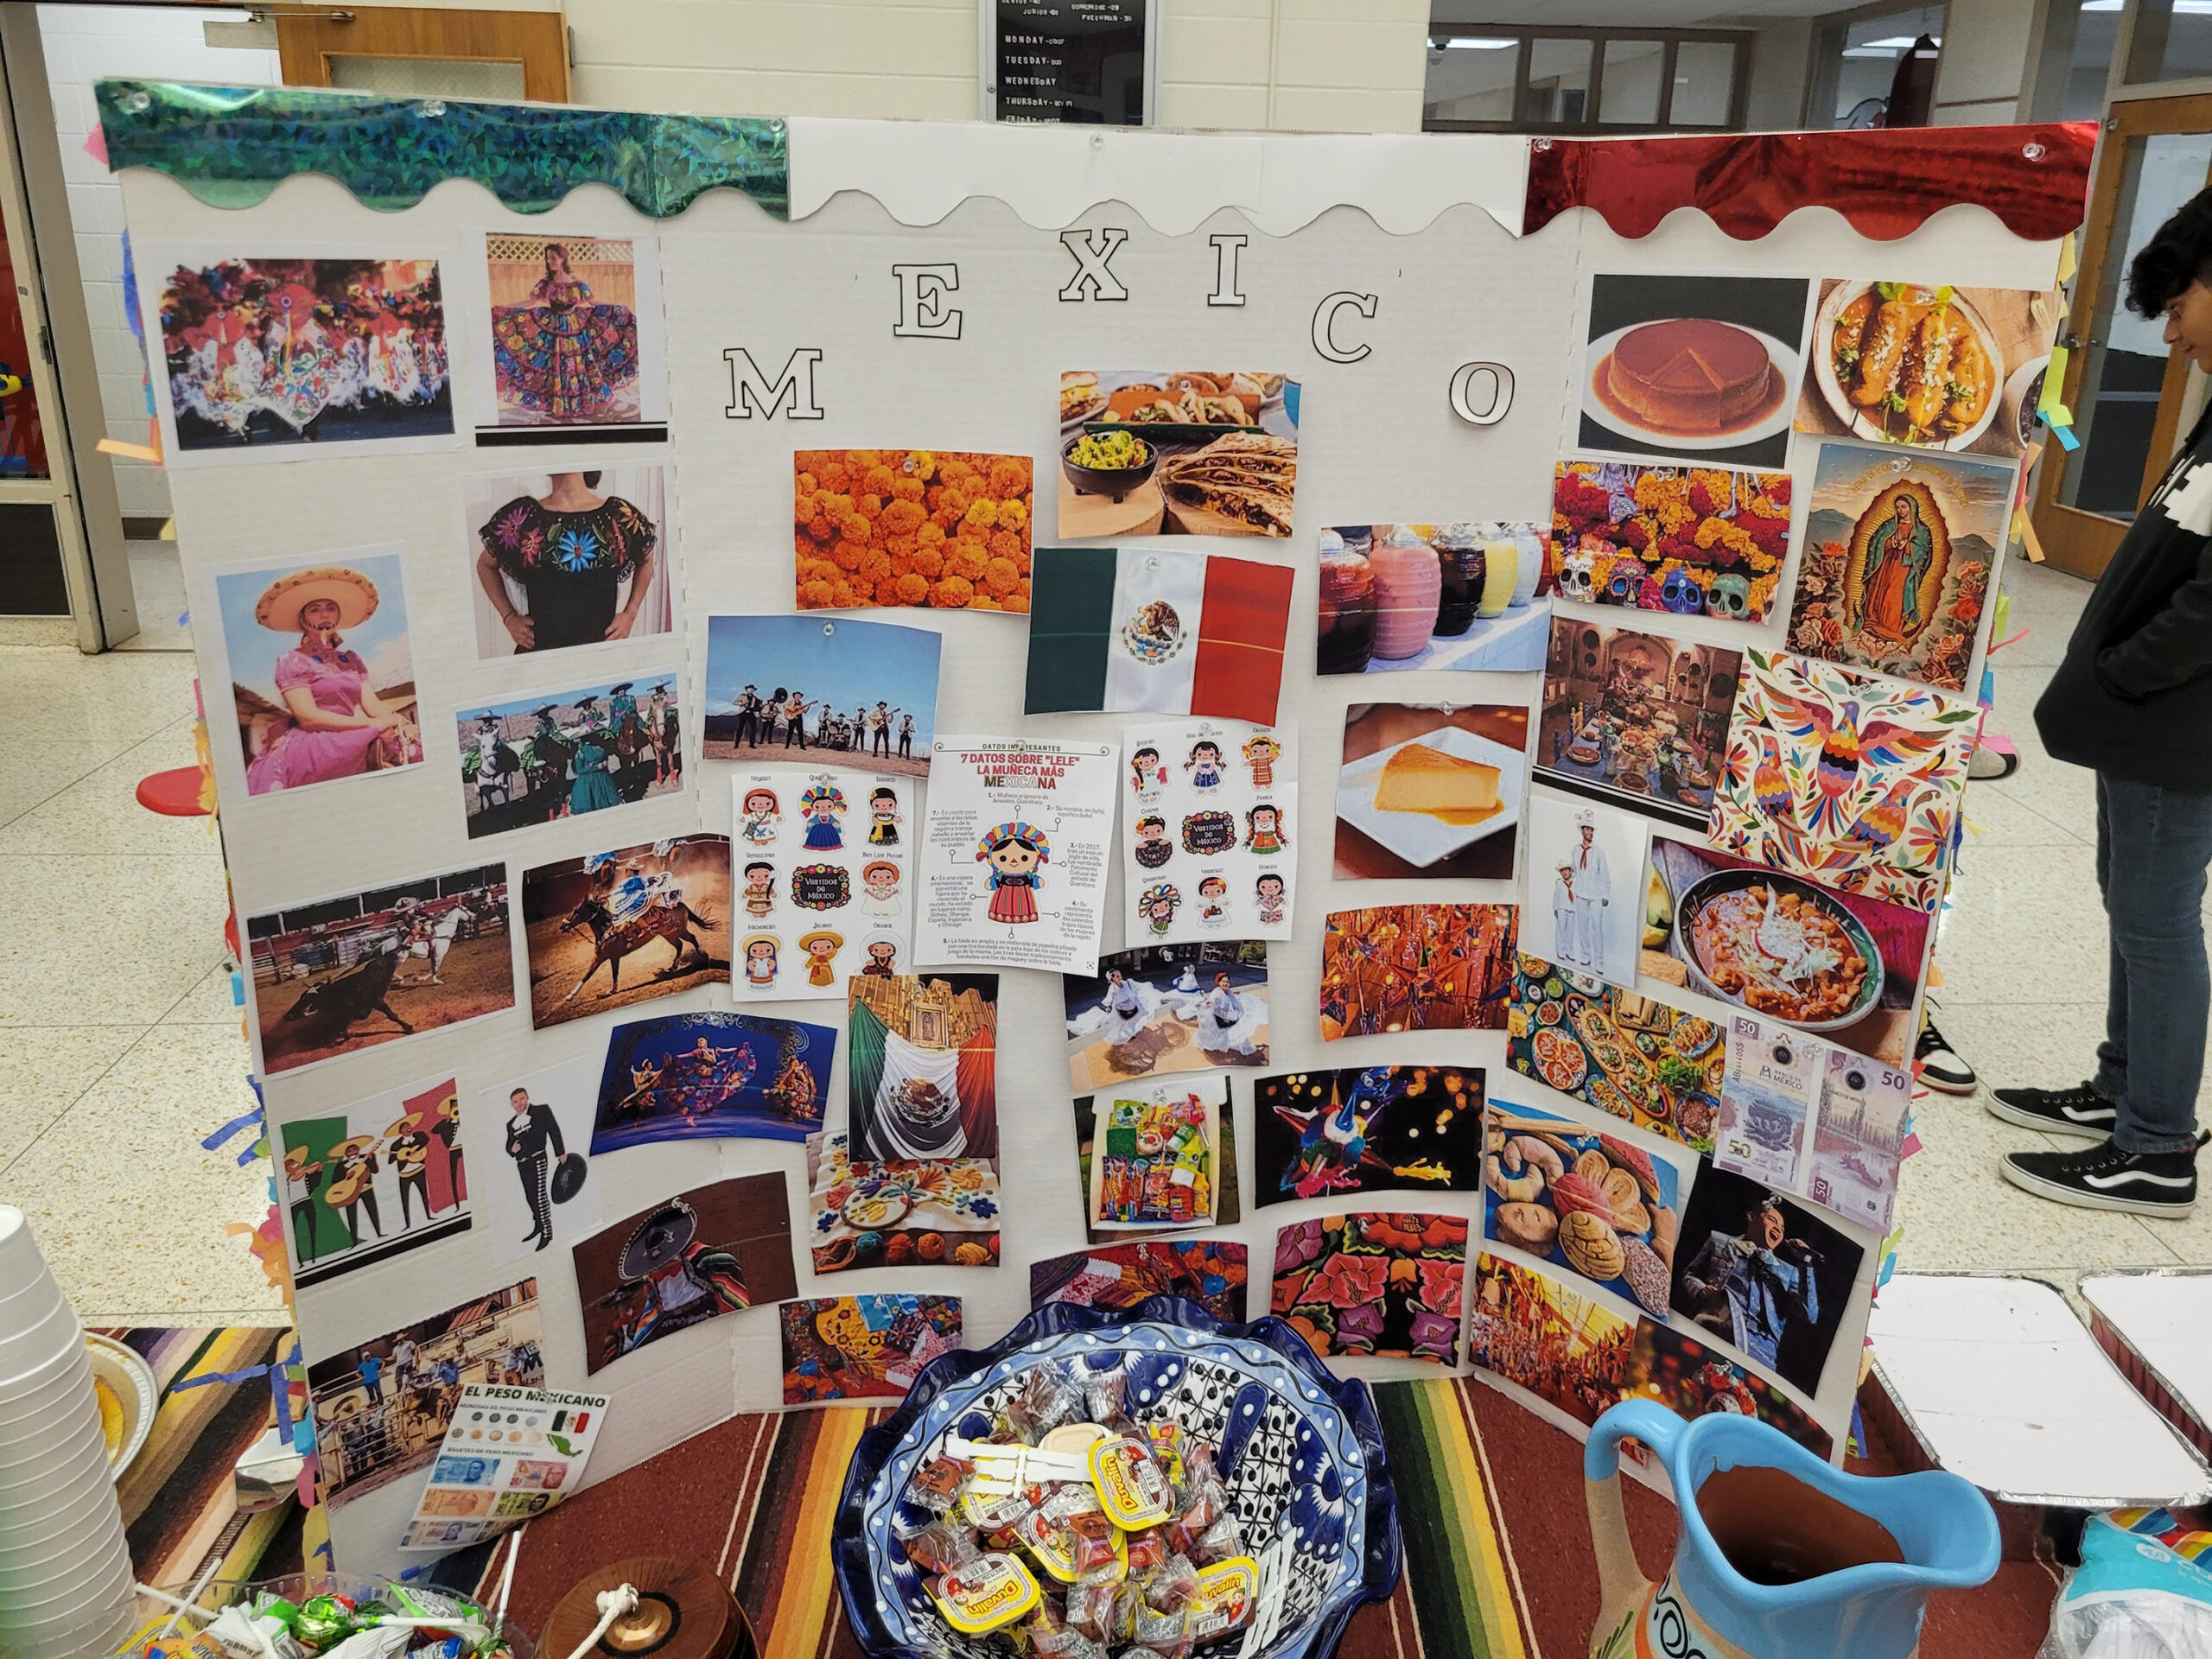 A colorful poster board showing photos of cultural aspects of Mexico